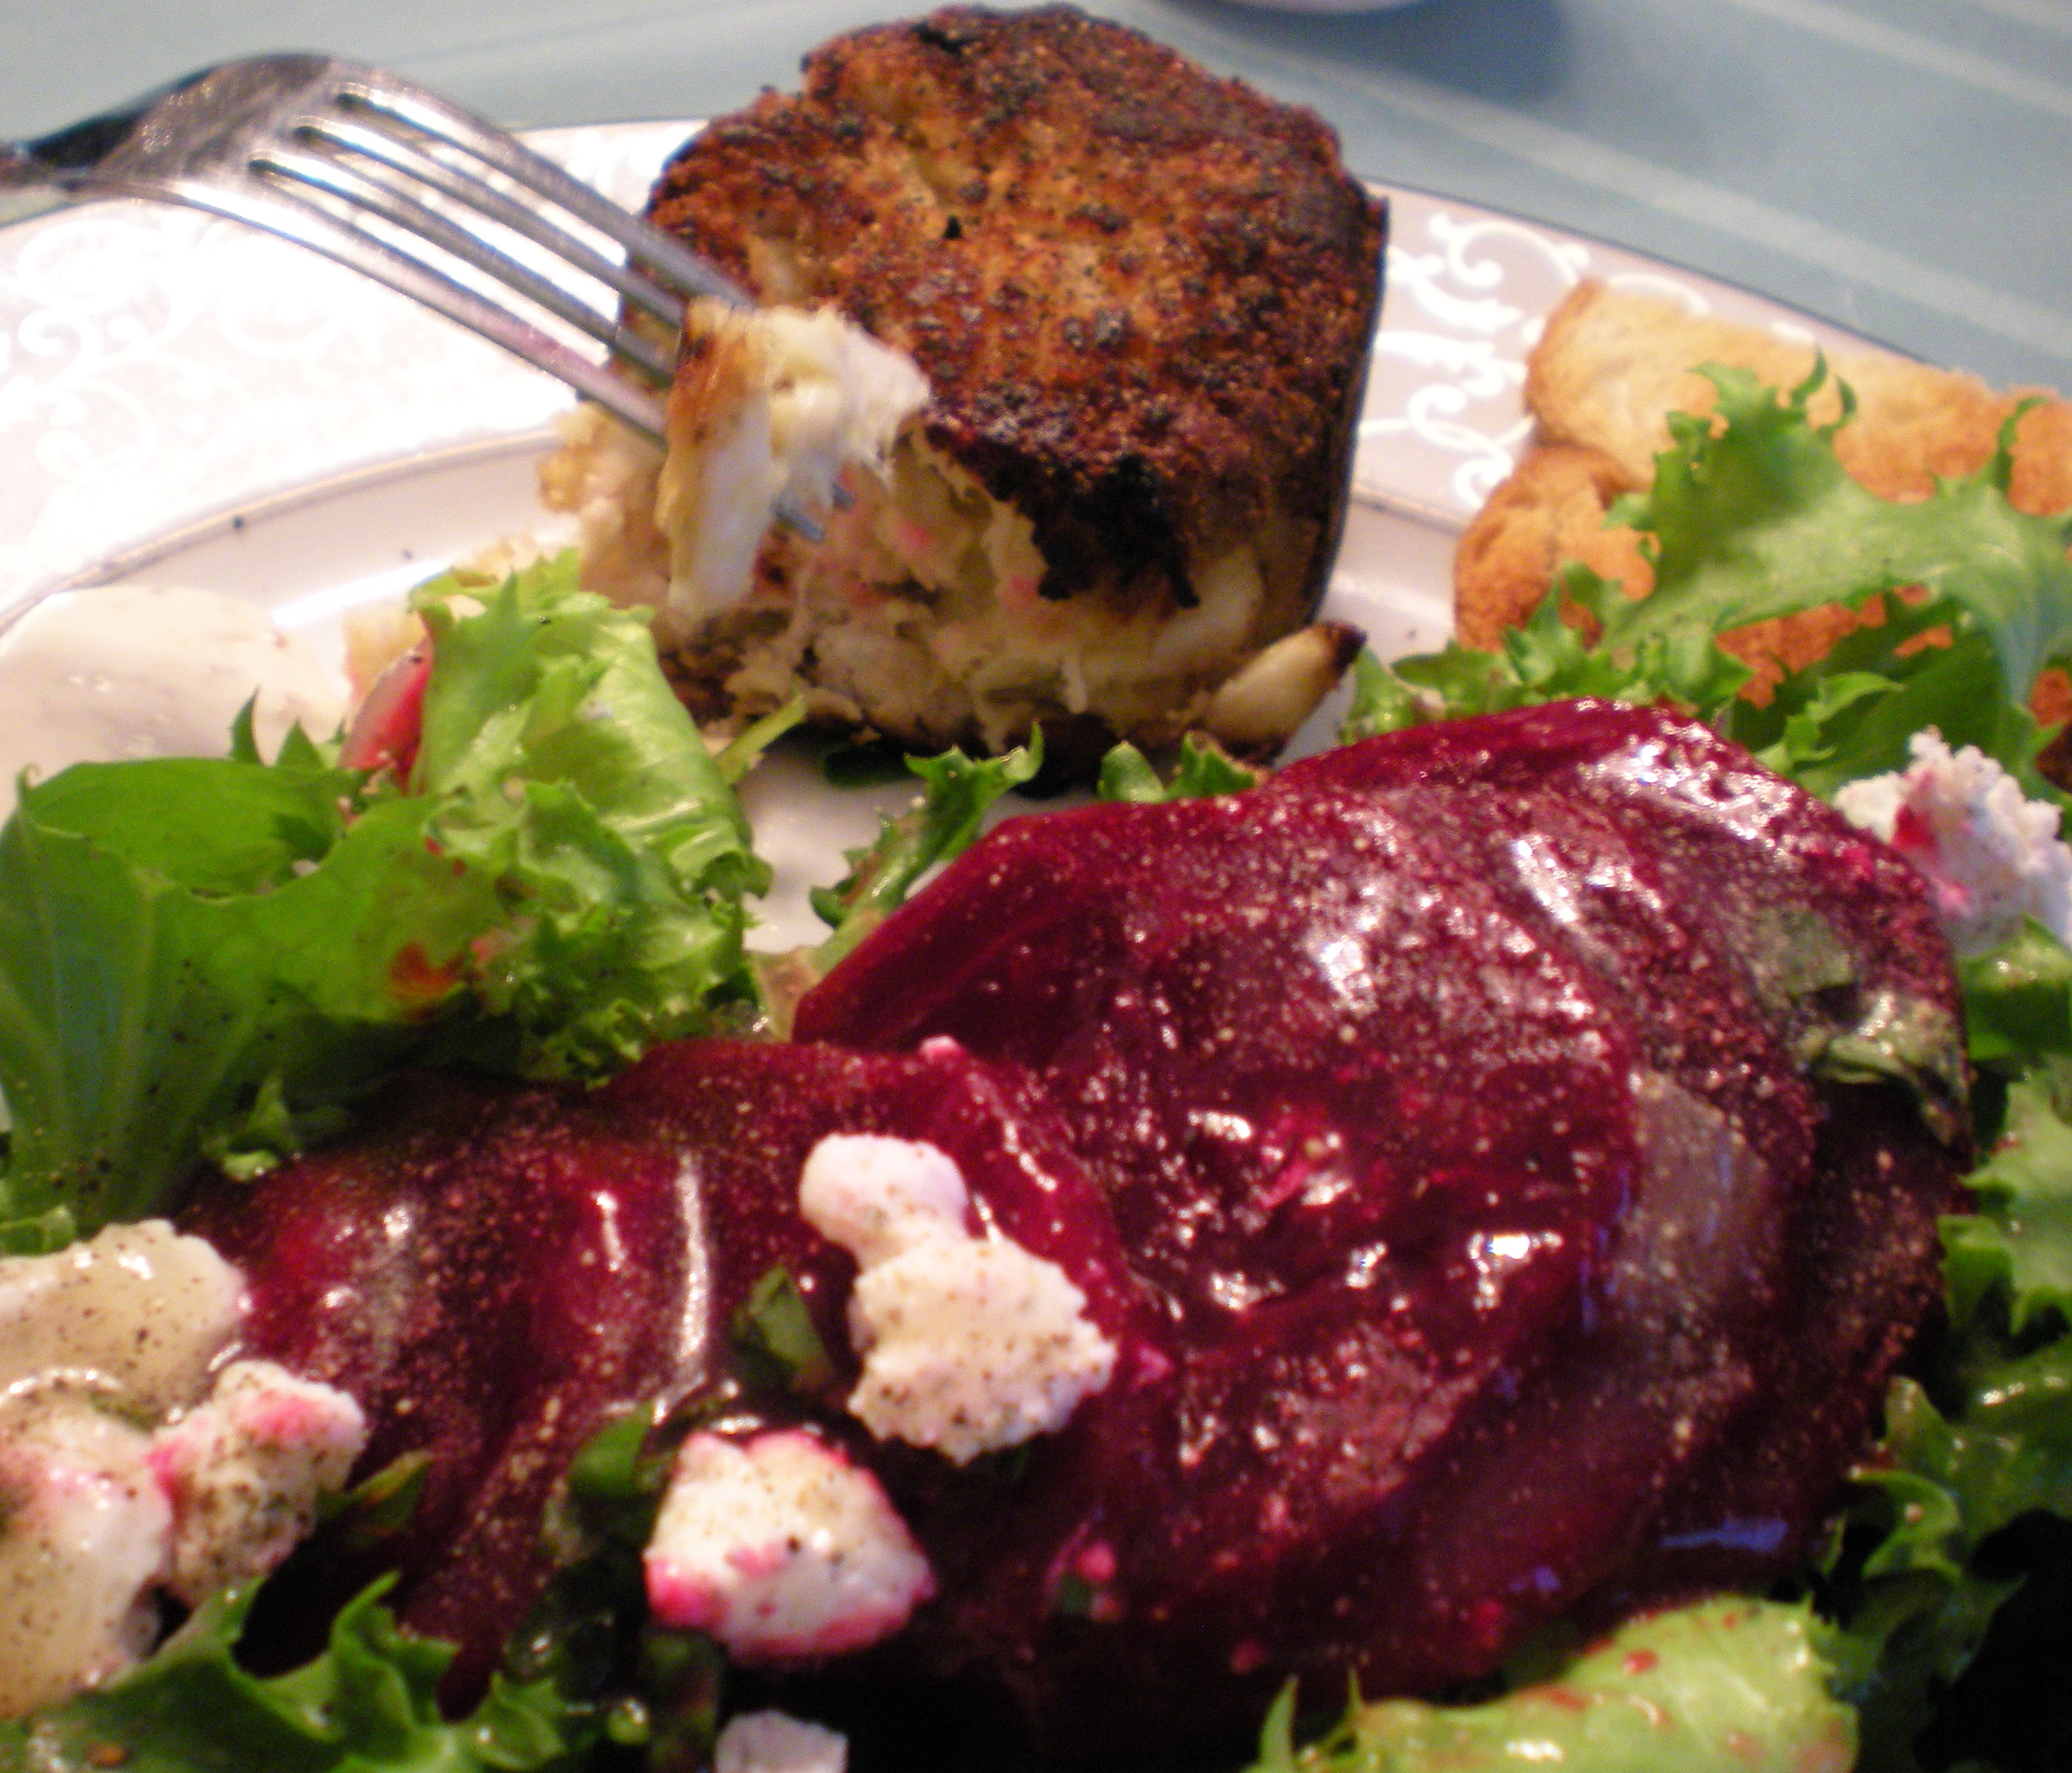 Fresh Beet Salad...this one is Mum's with the crab cake